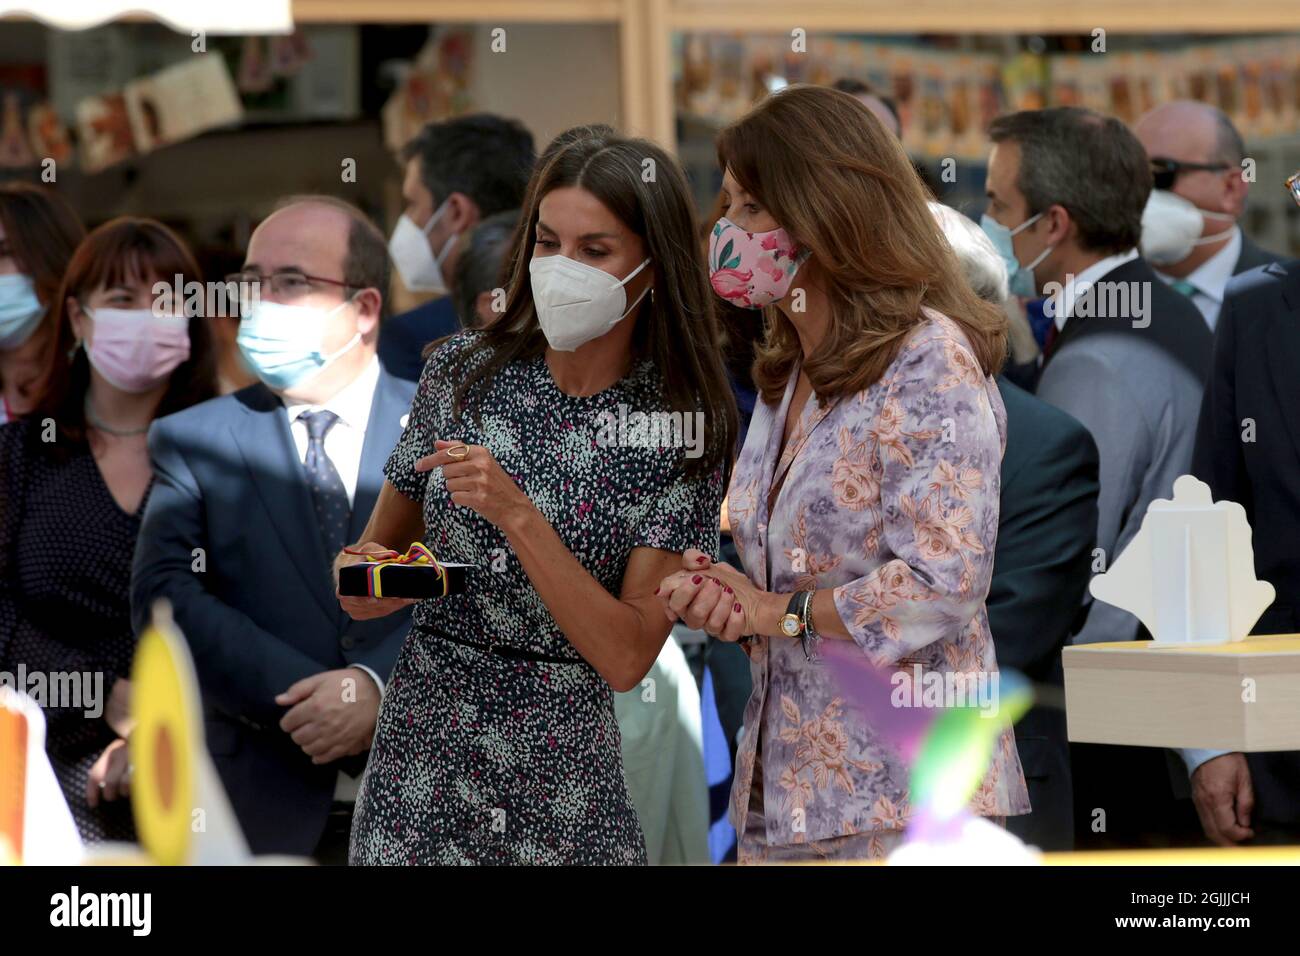 Madrid, Spain; 10.09.2021.- Queen Letizia (2R) with Vice President of Colombia, Marta Lucía Ramírez (R). Queen Letizia inaugurates the Madrid Book Fair, which in this 80th edition has Colombia as the guest of honor. Reina Letizia debuts a dress with a fantasy micro-print by the German firm Hugo Boss, combined with fuchsia undercut shoes by Carolina Herrera and jewelry, she has opted for yellow gold earrings and for Karen Hallam's ring Photo: Juan Carlos Rojas/Picture Alliance Credit: dpa picture alliance/Alamy Live News Stock Photo